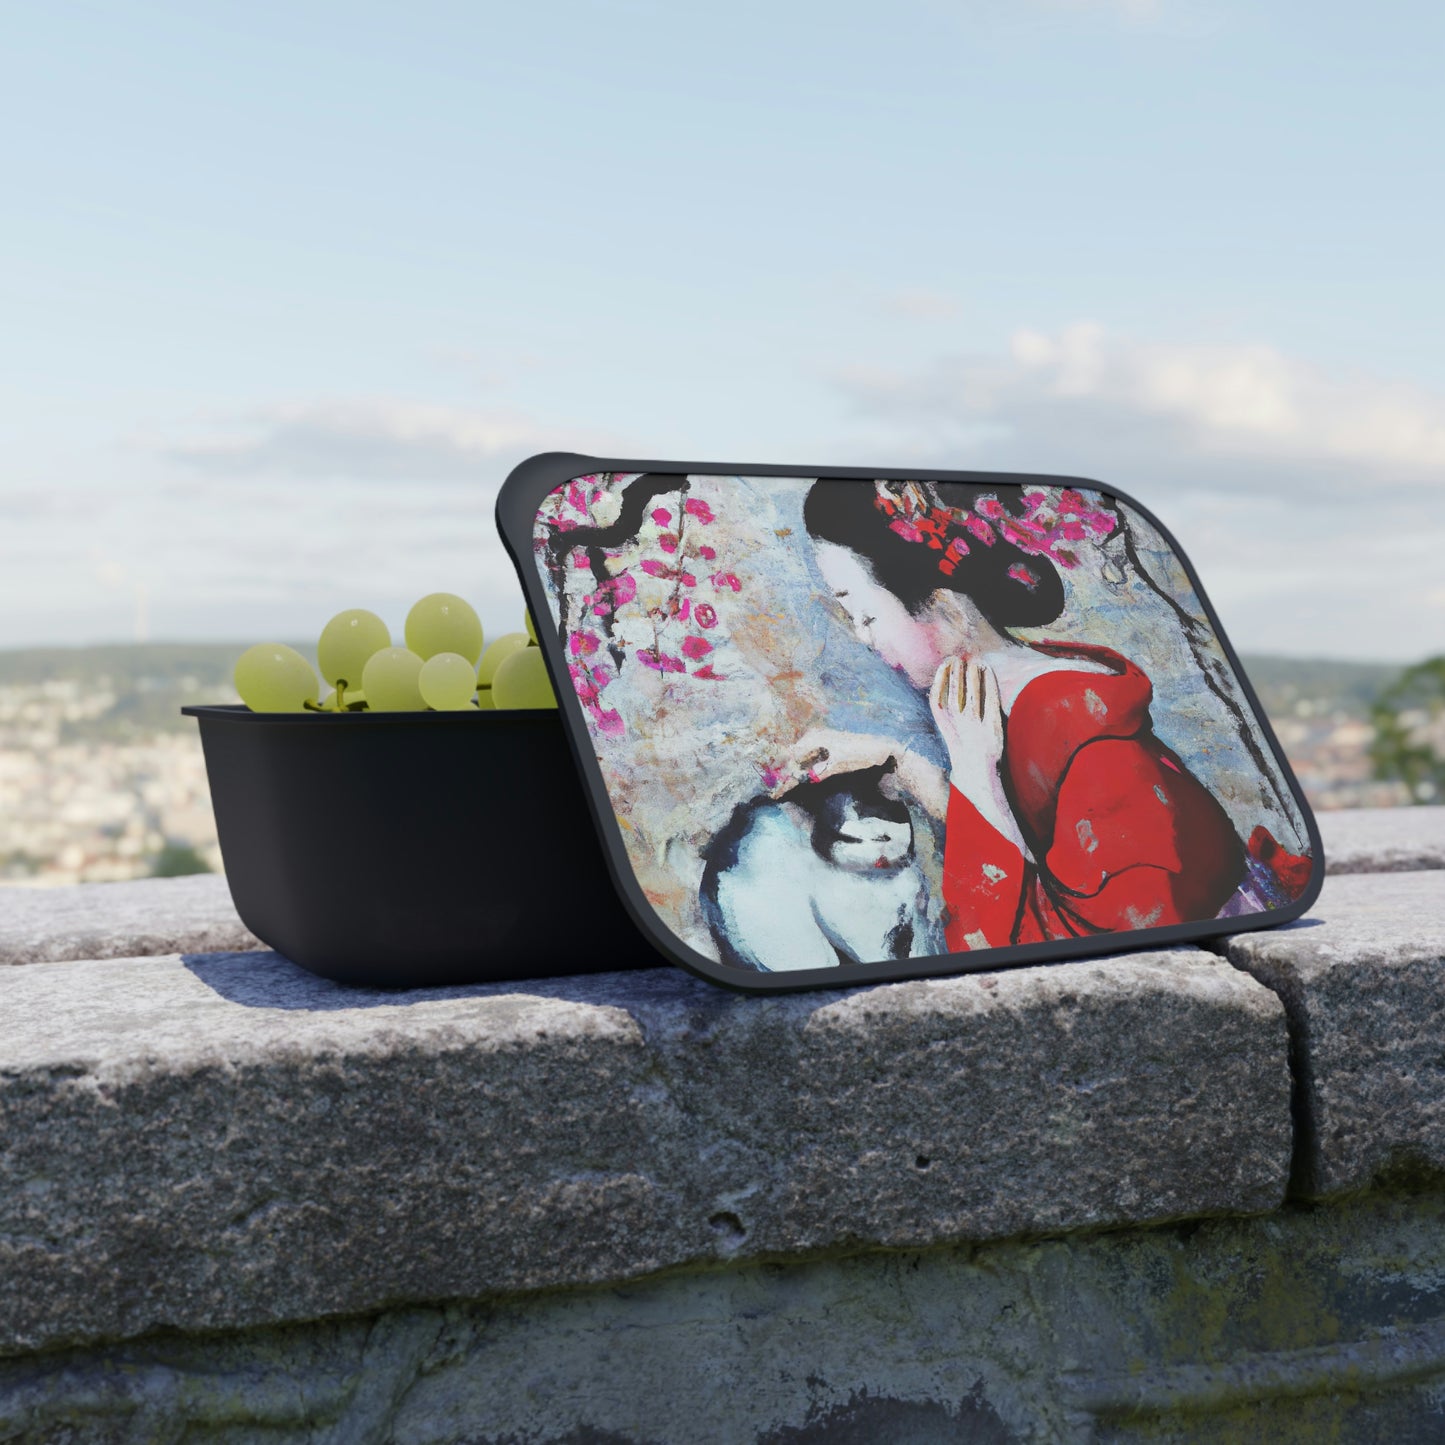 Geisha and a cat PLA Bento Box with Band and Utensils, Art painting maiko and a cat and a sakura tree lunch box, Asian-inspired art bento